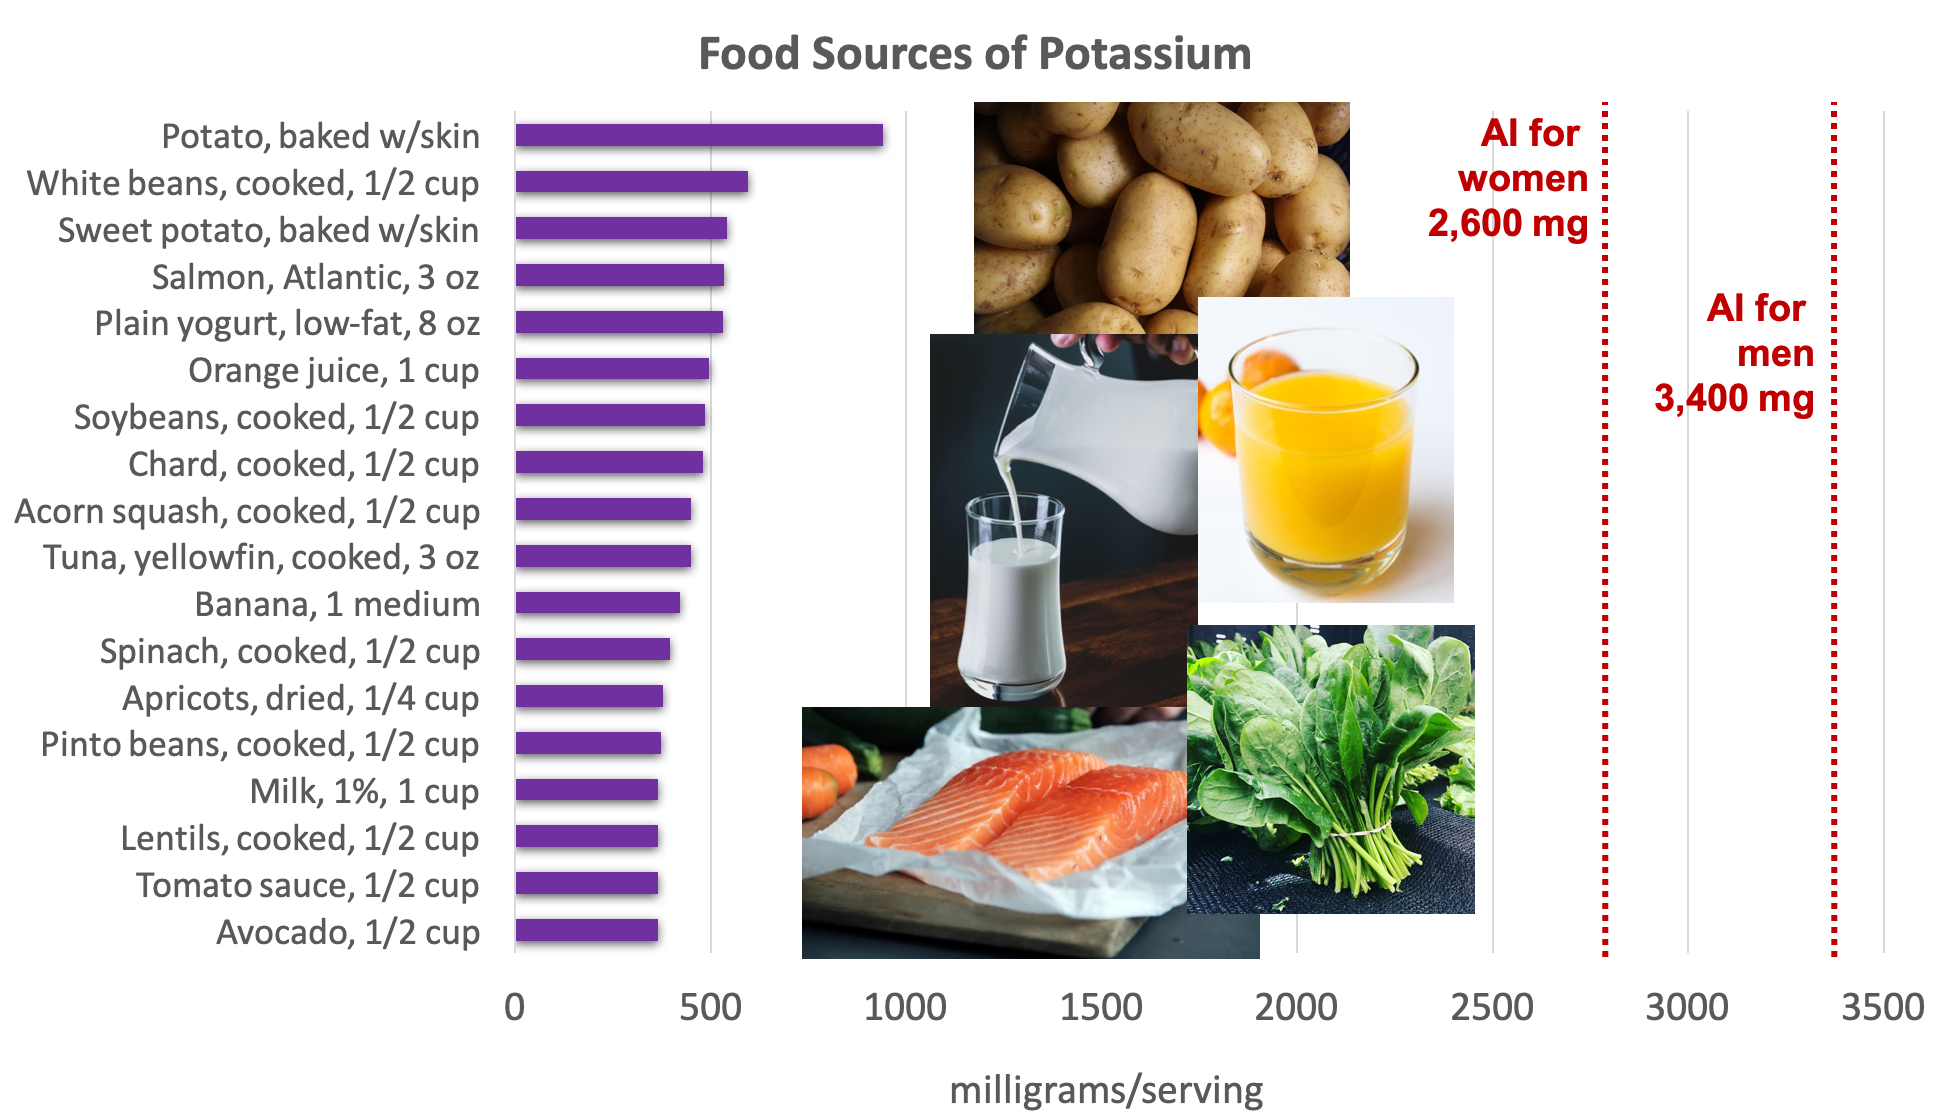 Bar graph showing dietary sources of potassium compared with the AI for adults of 2,600 mg for women and 3,400 mg per day for men. Top sources include vegetables (potatoes, spinach, chard), fruit (orange juice, dried apricots), beans, salmon, and dairy (yogurt and milk). Photos are shown of potatoes, milk, orange juice, salmon, and chard.